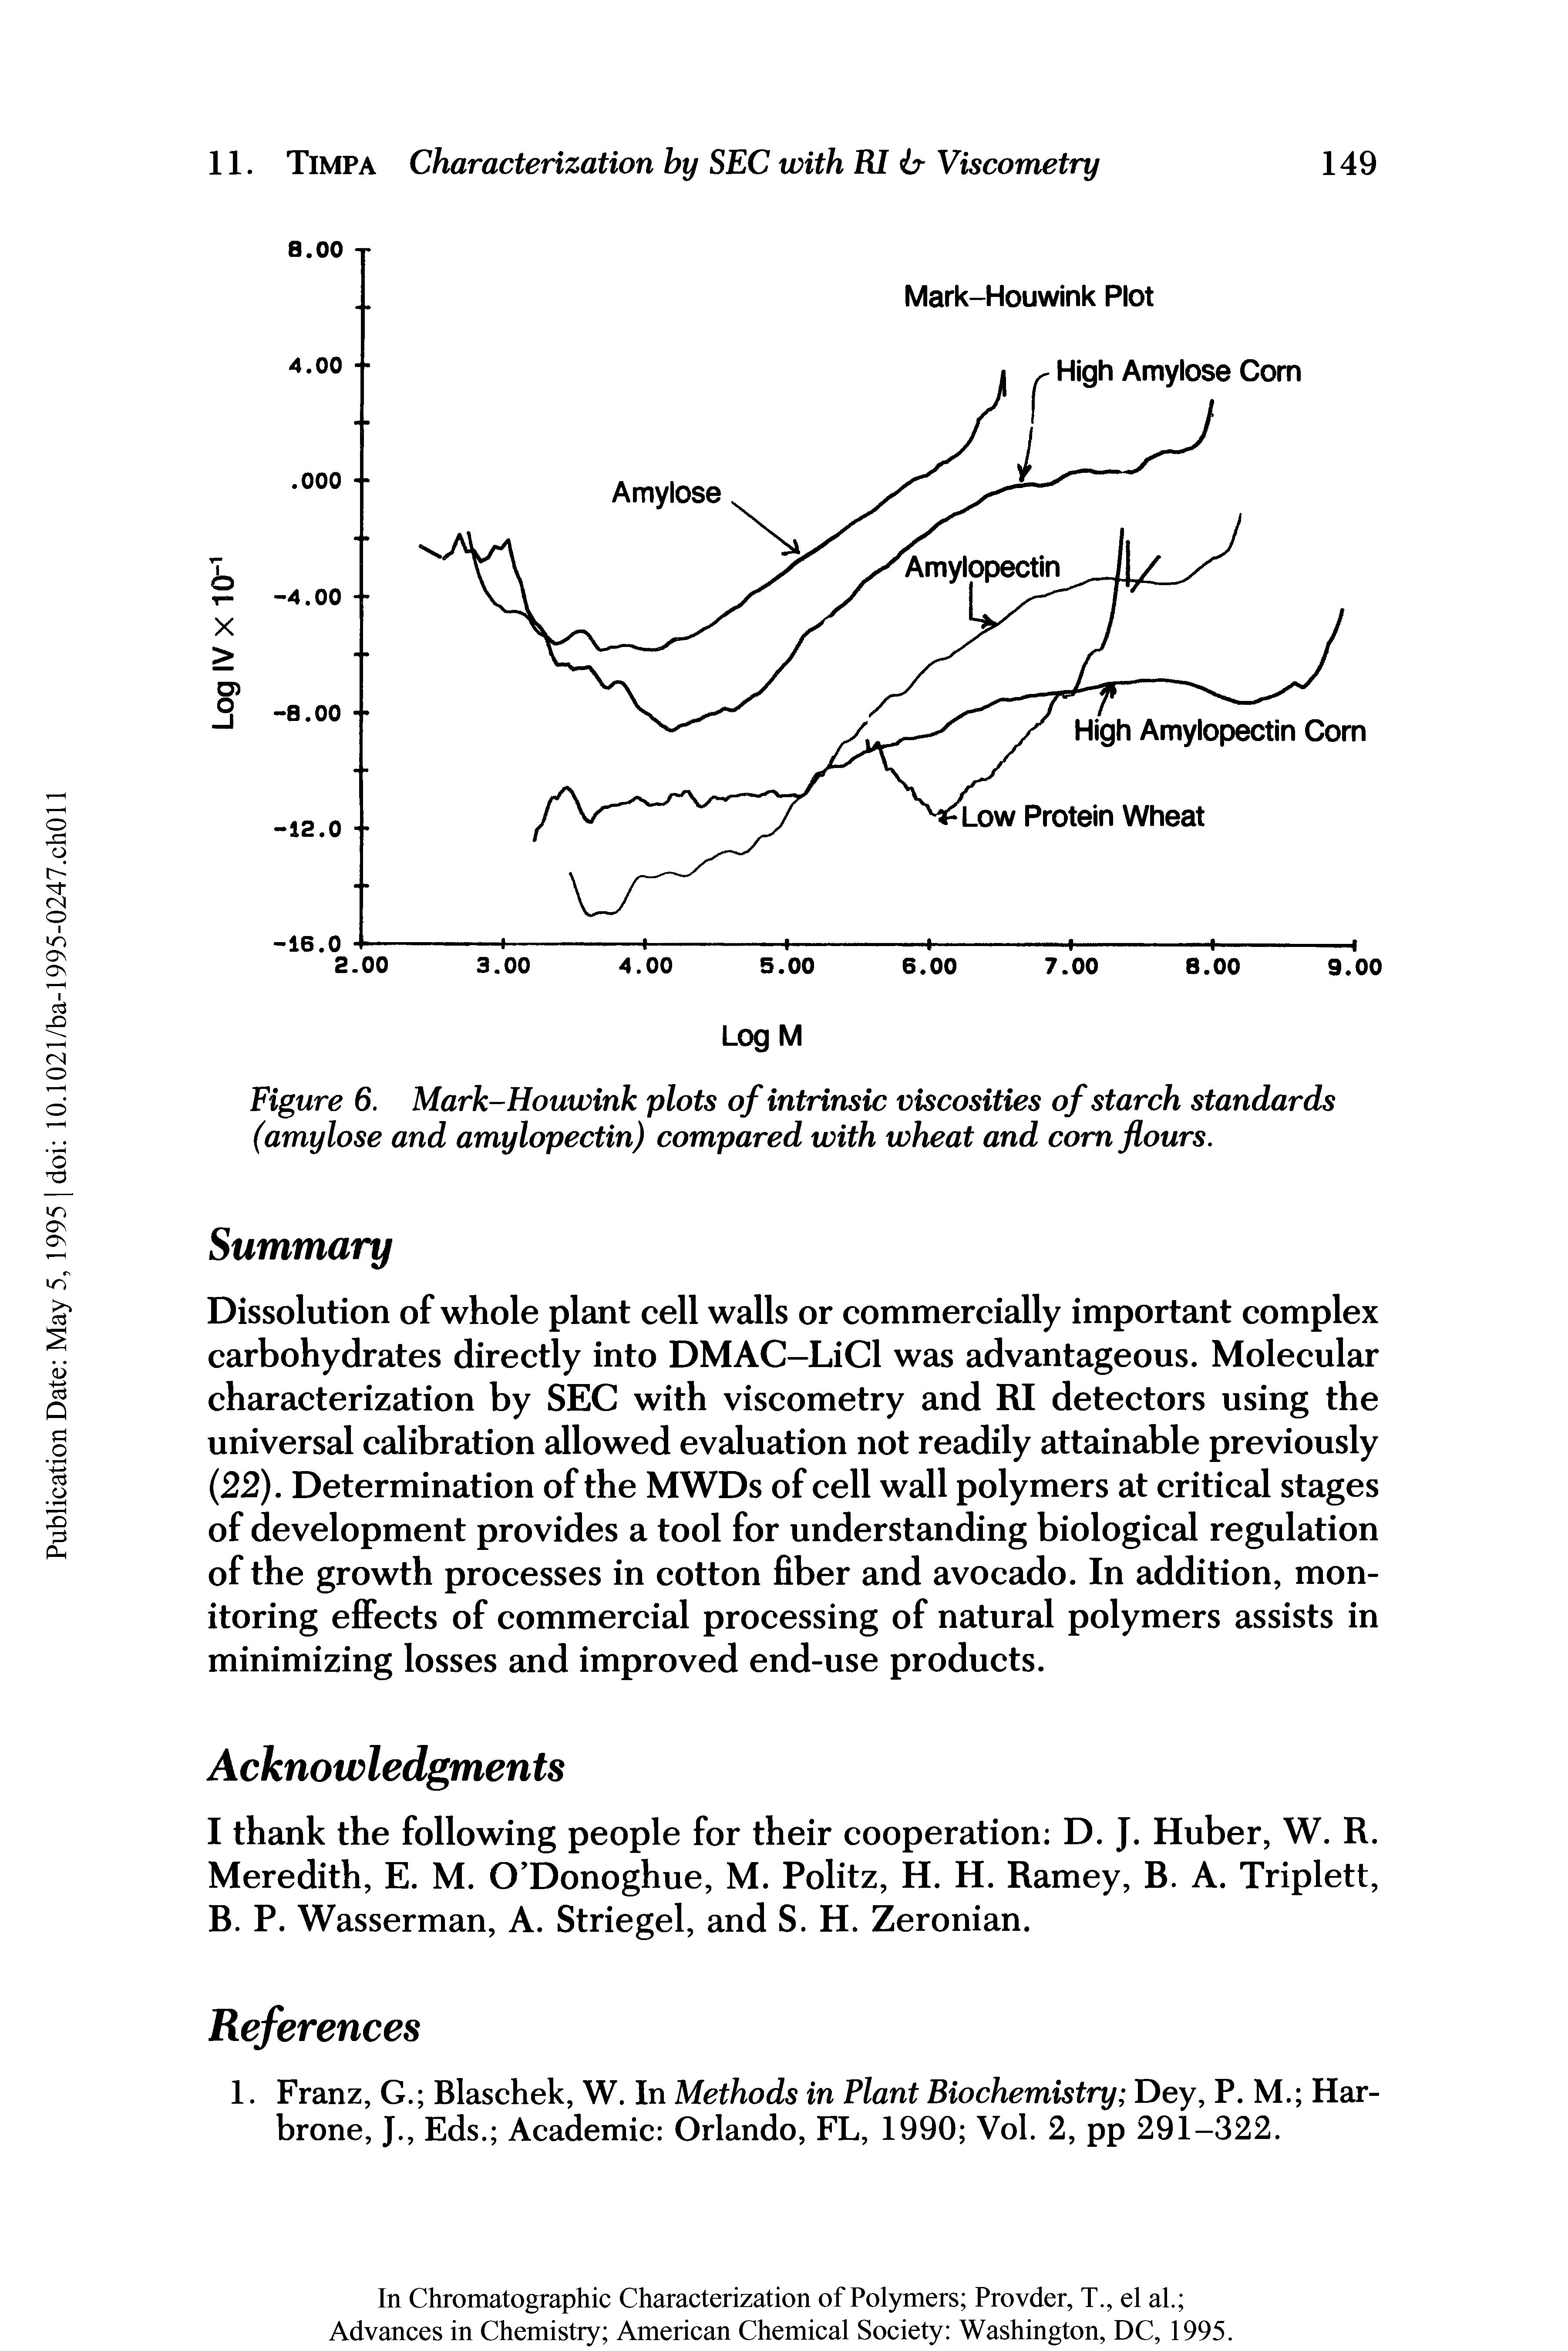 Figure 6. Mark-Houwink plots of intrinsic viscosities of starch standards (amylose and amylopectin) compared with wheat and cornflours.